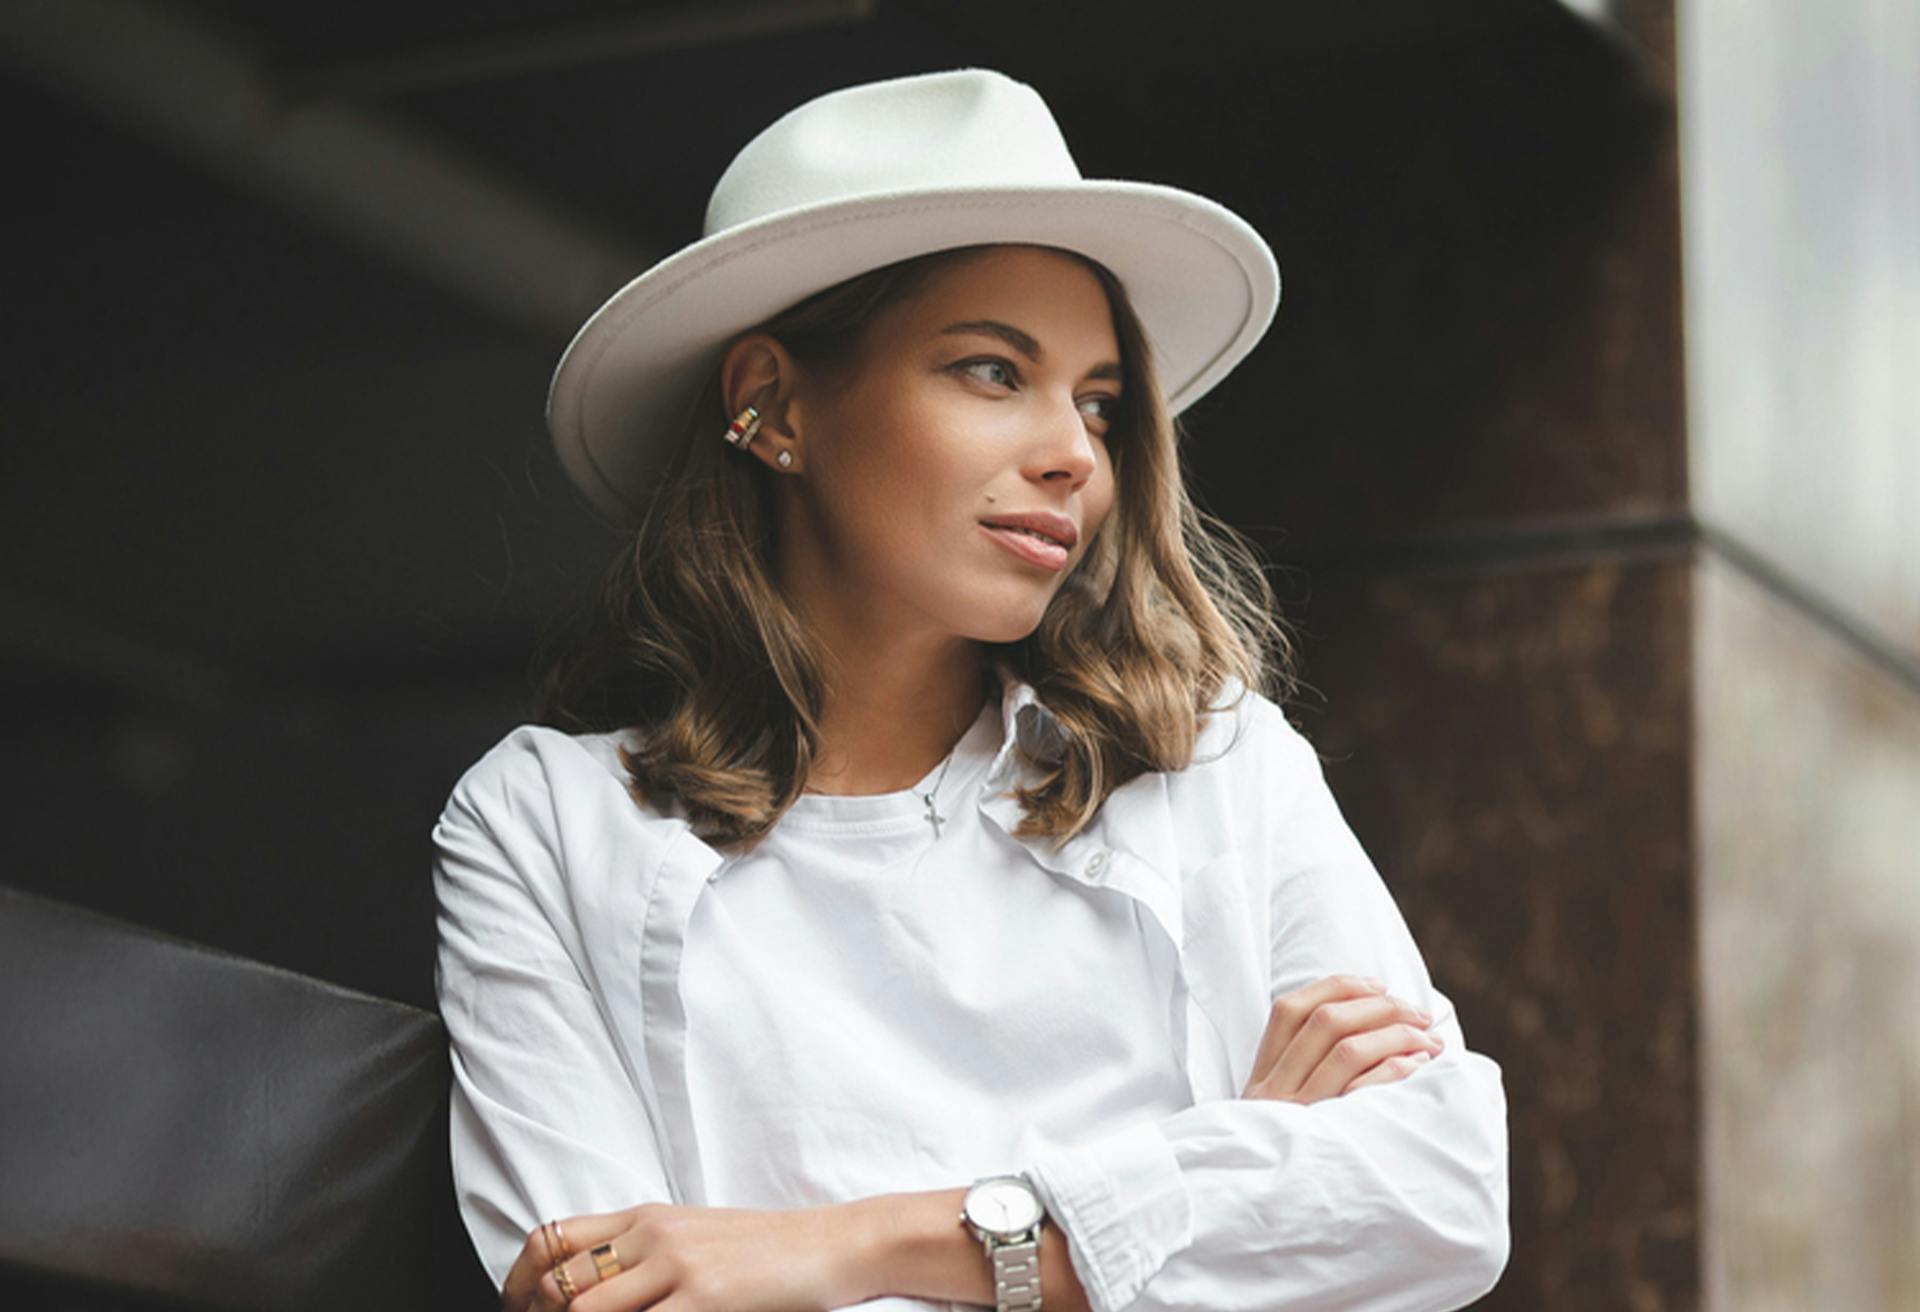 Woman in White Hat and Blouse